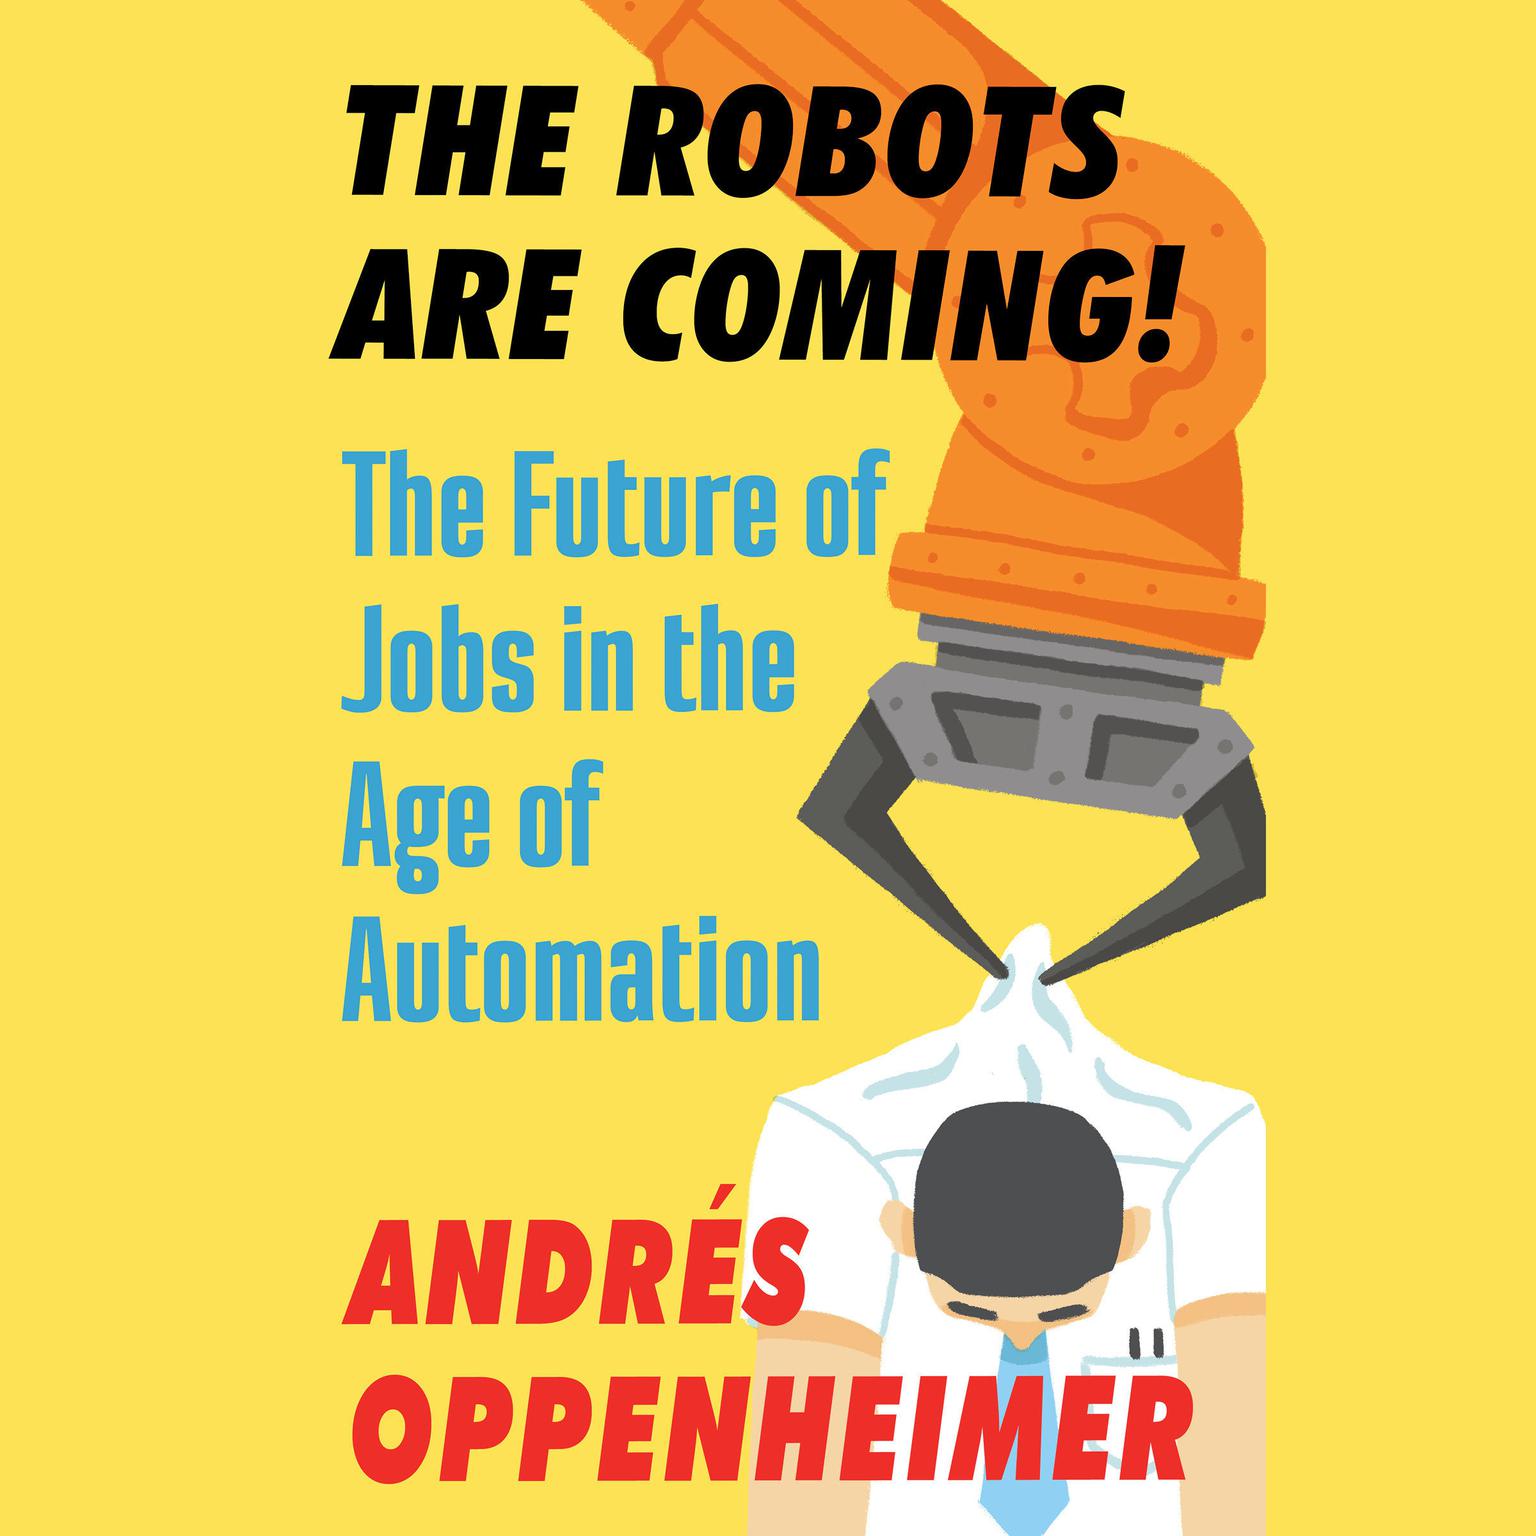 The Robots Are Coming!: The Future of Jobs in the Age of Automation Audiobook, by Andres Oppenheimer